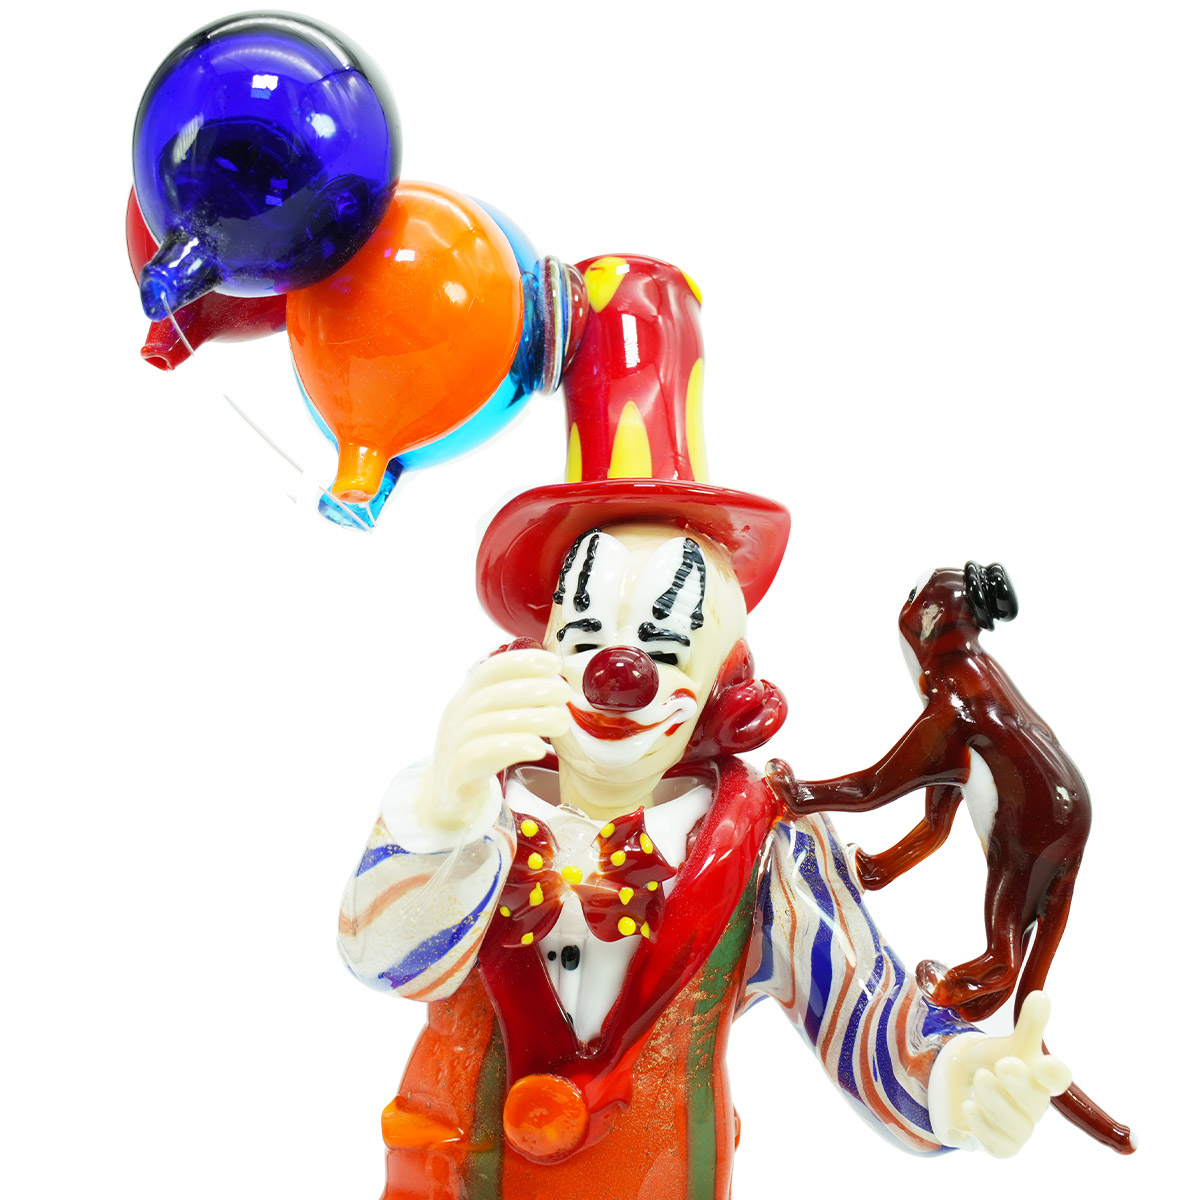 Sculptures & Figurines - Objects of Art glass - Various Collections: Clown  figurine - Big size - Original Murano Glass OMG